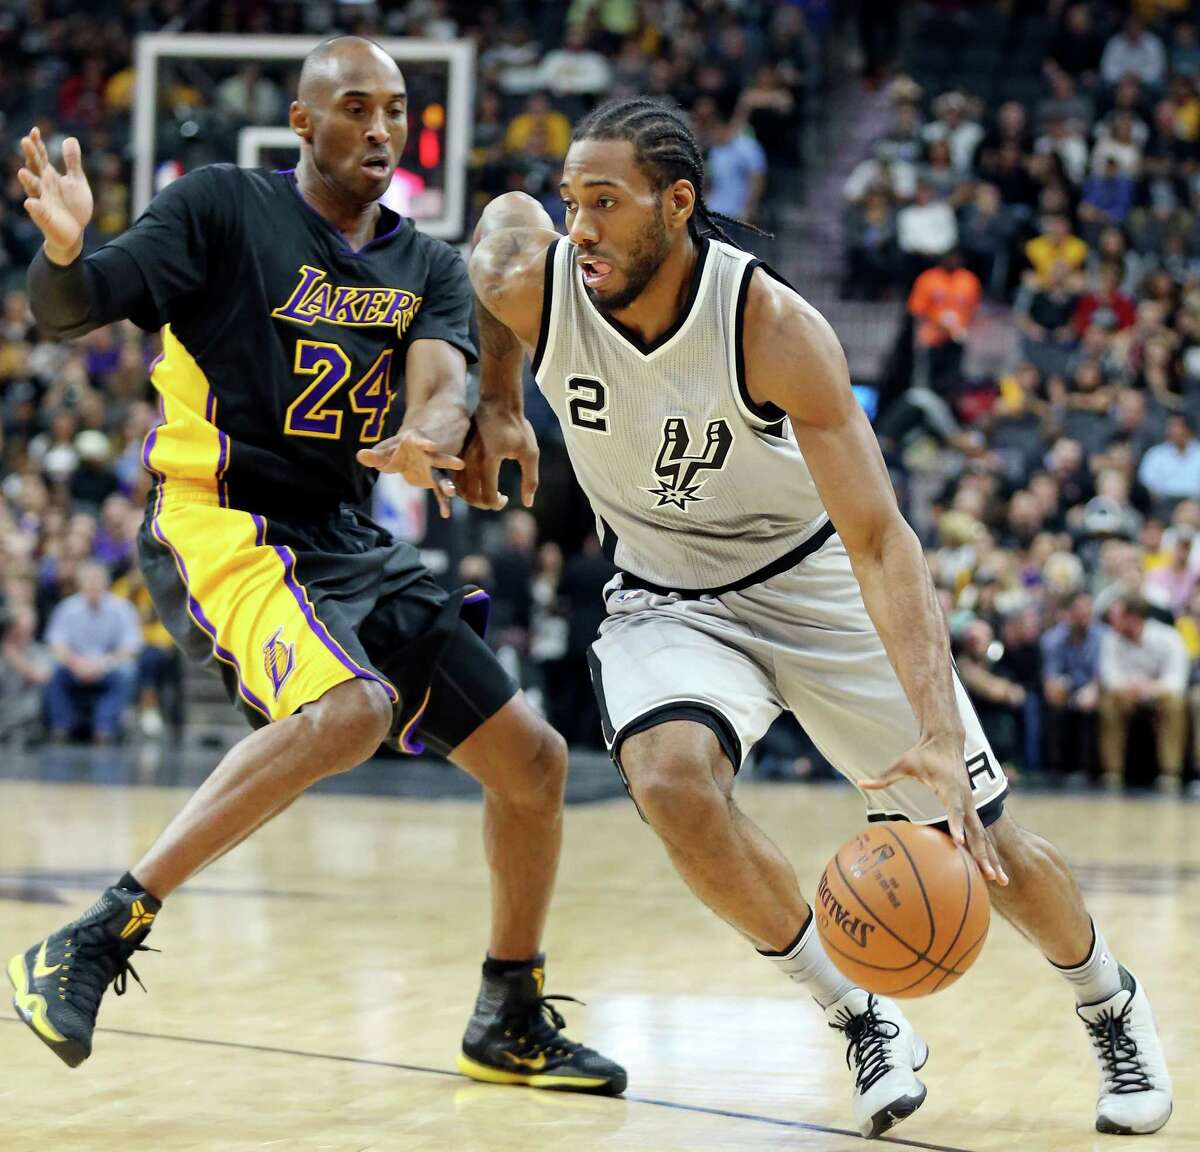 San Antonio Spurs' Kawhi Leonard drives around Los Angeles Lakers' Kobe Bryant during first half action Friday Dec. 11, 2015 at the AT&T Center.